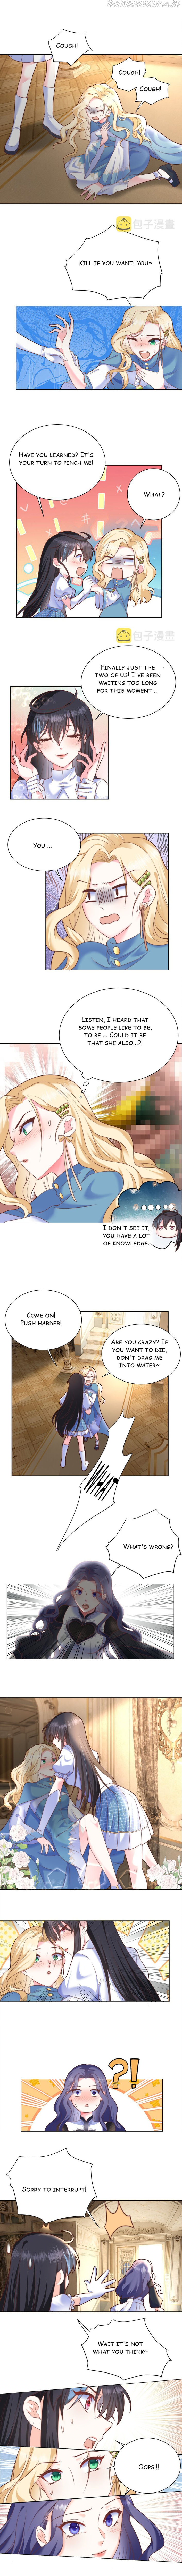 Attacking the Demon King of Girls’ Dormitory chapter 5